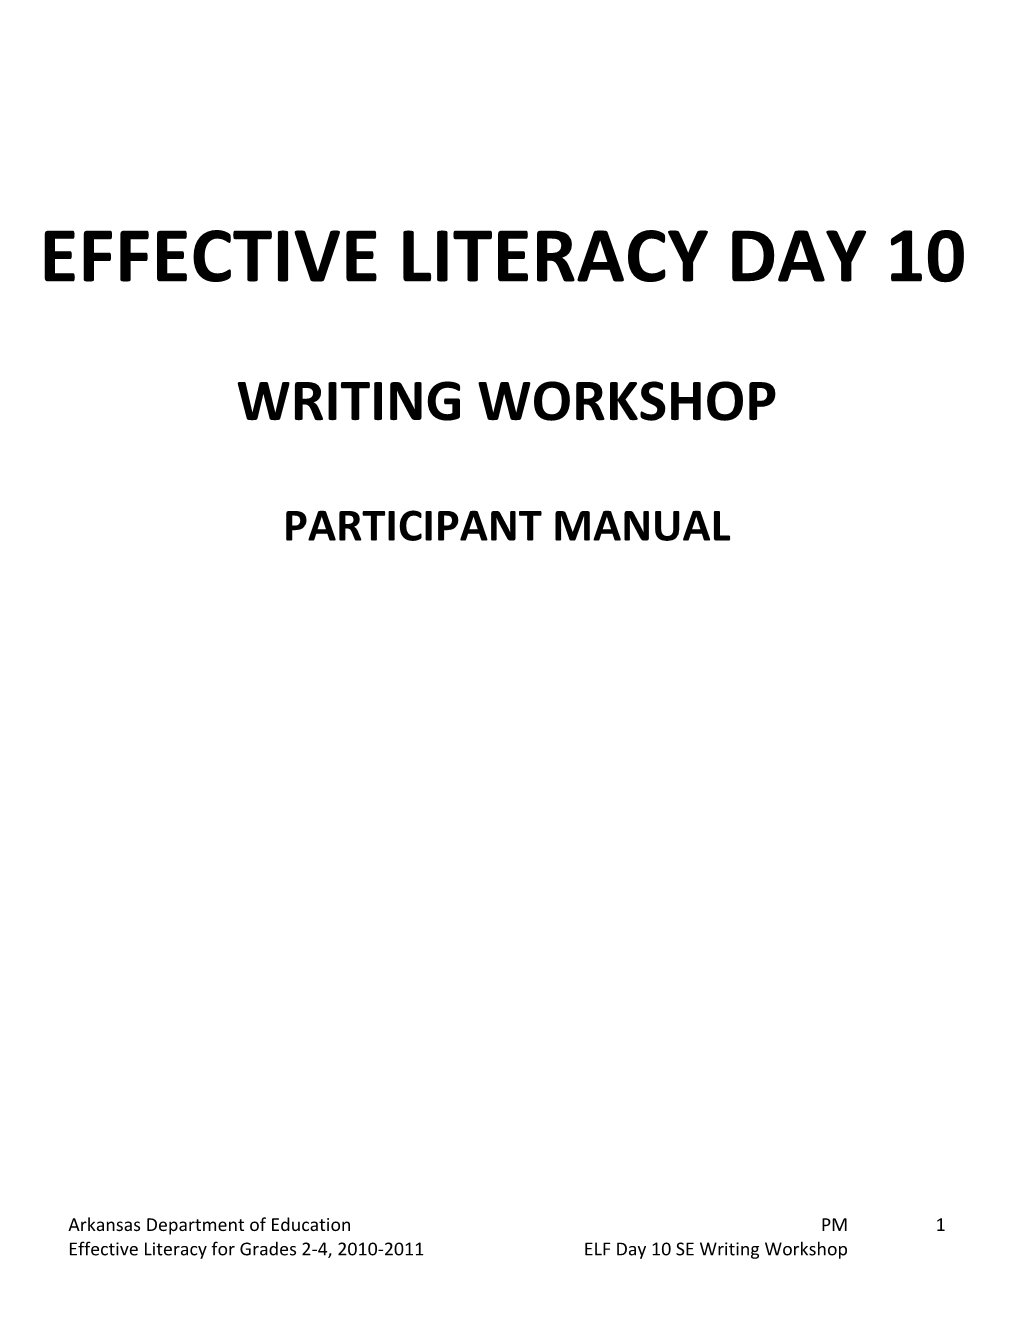 Effective Literacy Day 10